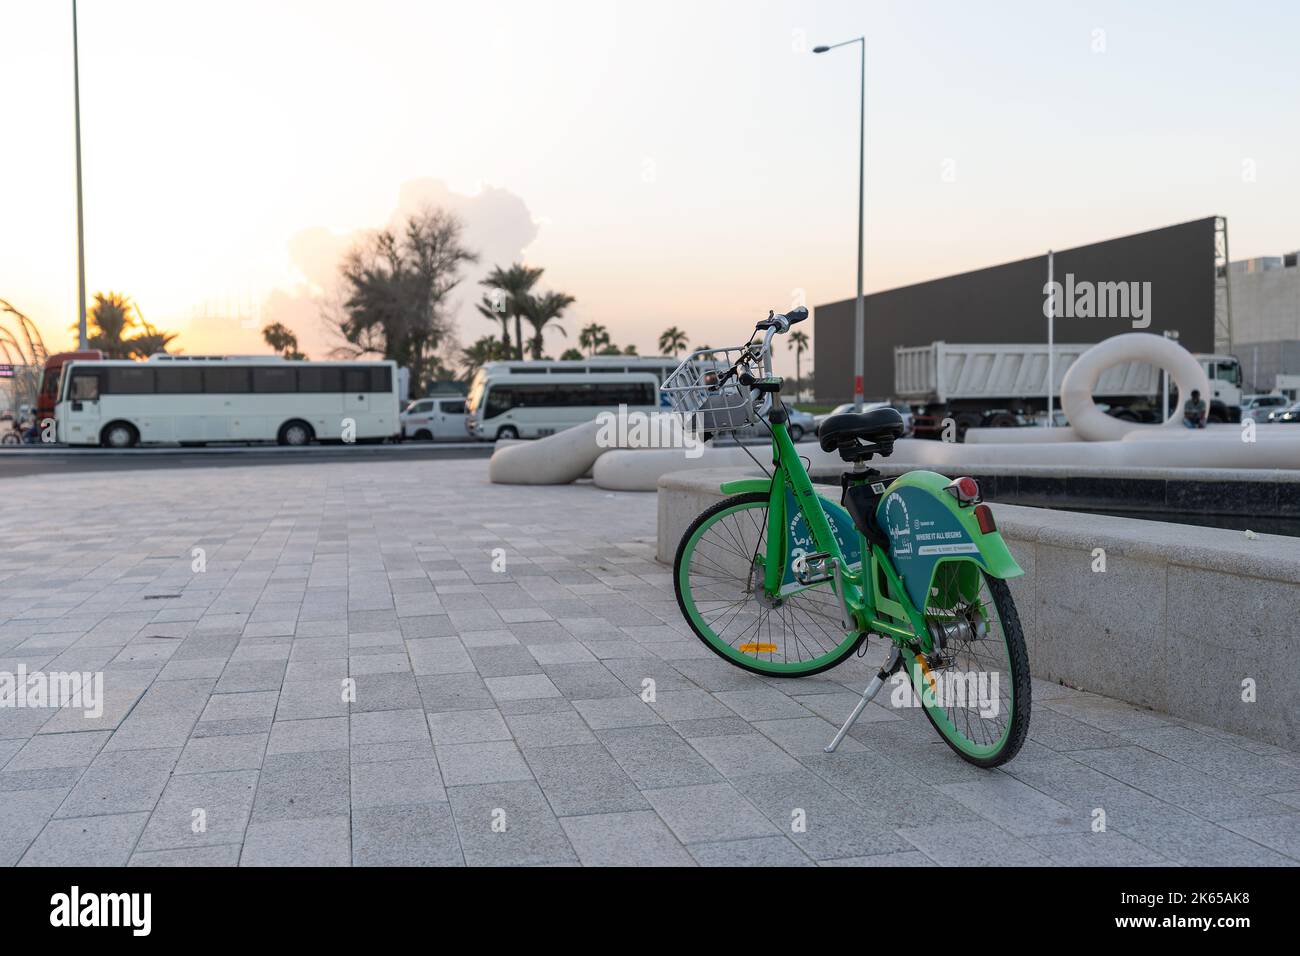 Pick and Ride is the first-ever dock-less smart cycle in Flag Plaza, Qatar. Stock Photo